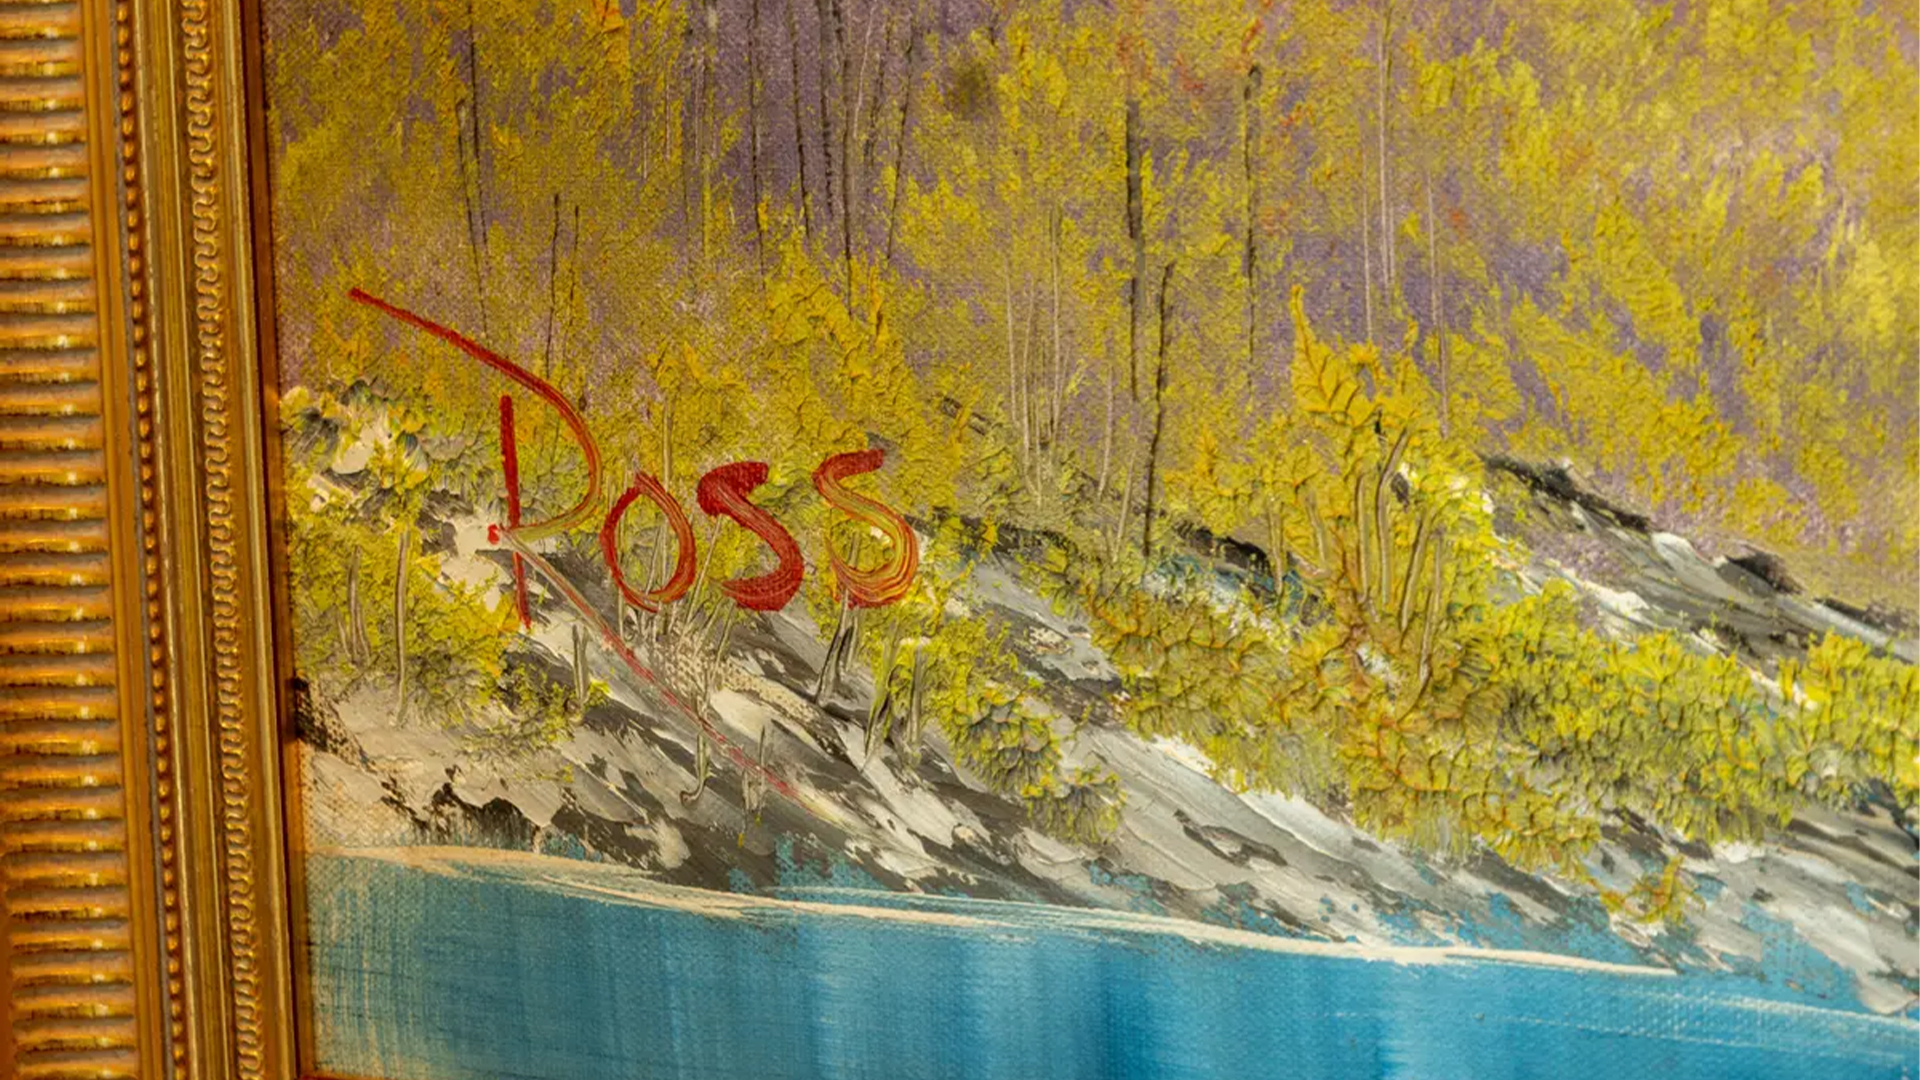 Bob Ross' signature on his painting "A Walk in the Woods"